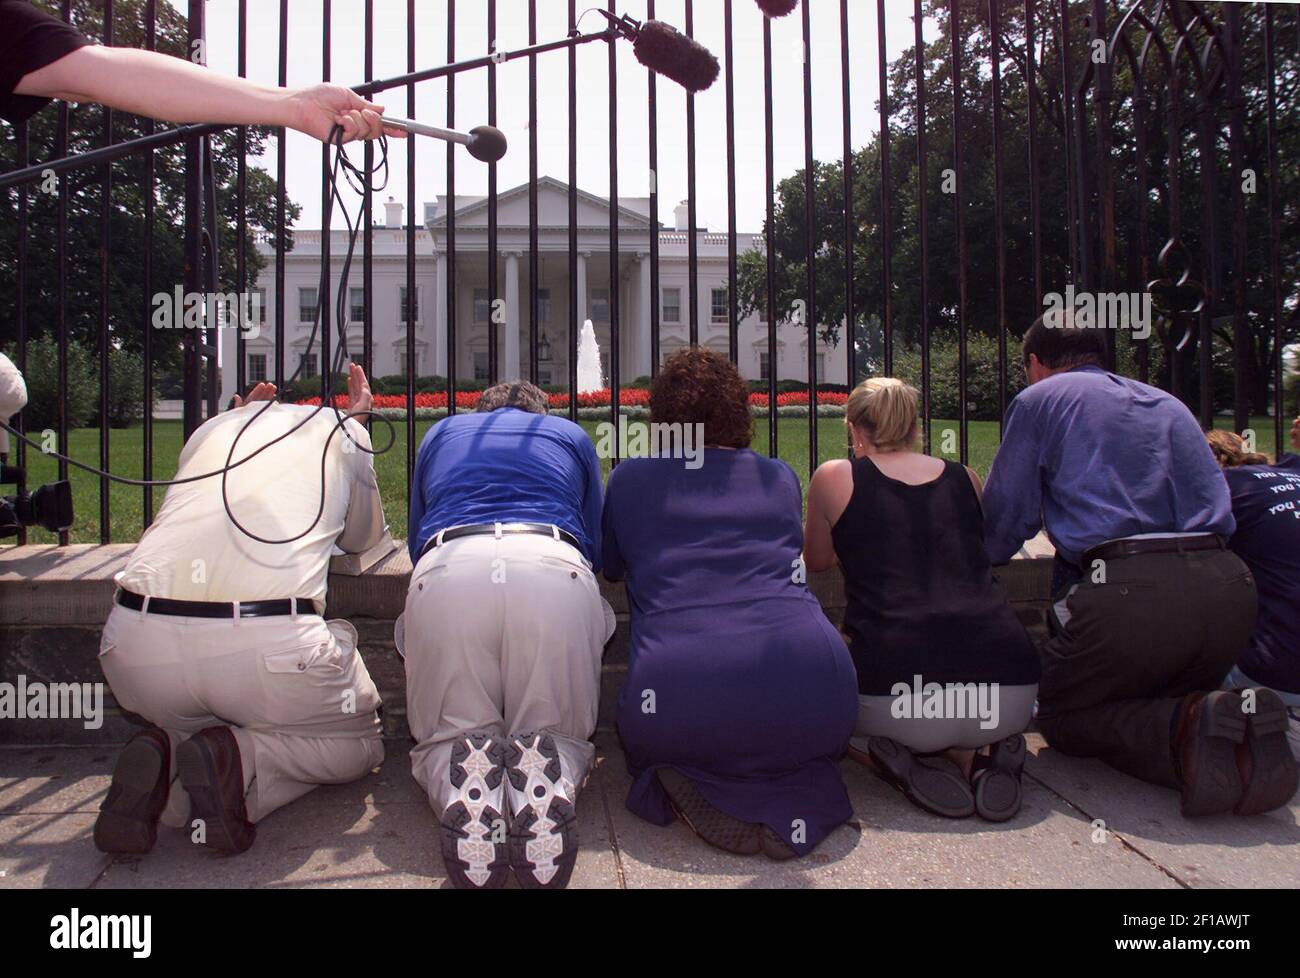 (KRT6) KRT US NEWS STORY SLUGGED: STEMCELL KRT PHOTOGRAPH BY CHUCK KENNEDY (August 9) WASHINGTON, D.C. - Members of the Christian Defense Coalition pray outside the fence of the White House during a rally to voice their opposition to federal funding of embryonic stem cell research. (Photo by KRT) AP NC KD BL 2001 (Horiz) (smd) (Additional photos available on KRT Direct, KRT/Newscom or upon request) Stock Photo